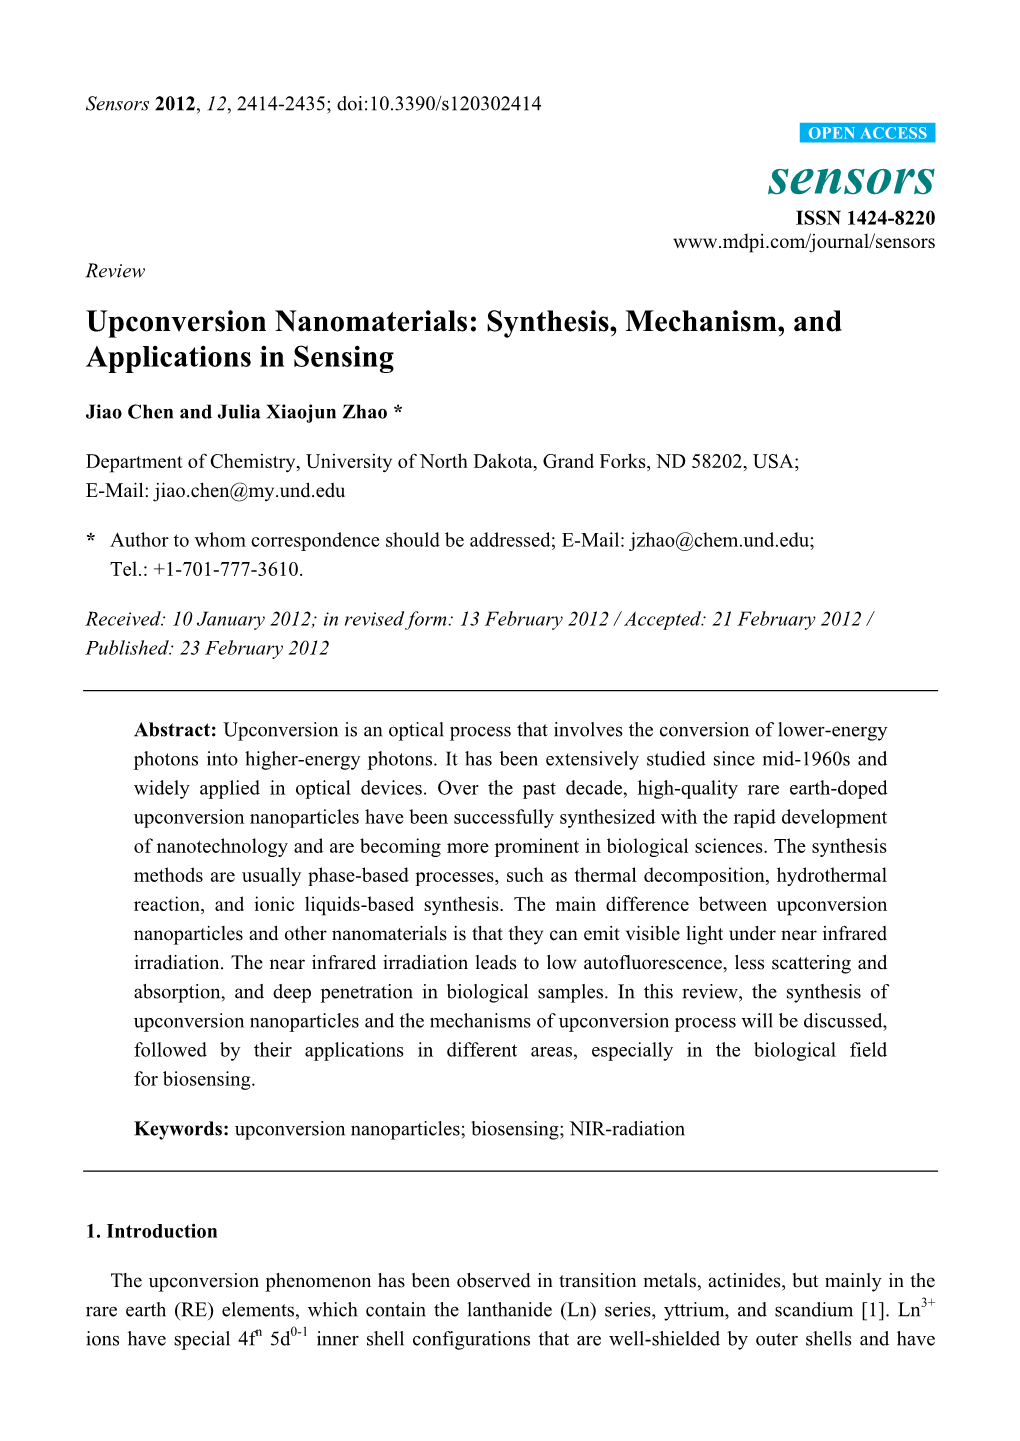 Upconversion Nanomaterials: Synthesis, Mechanism, and Applications in Sensing